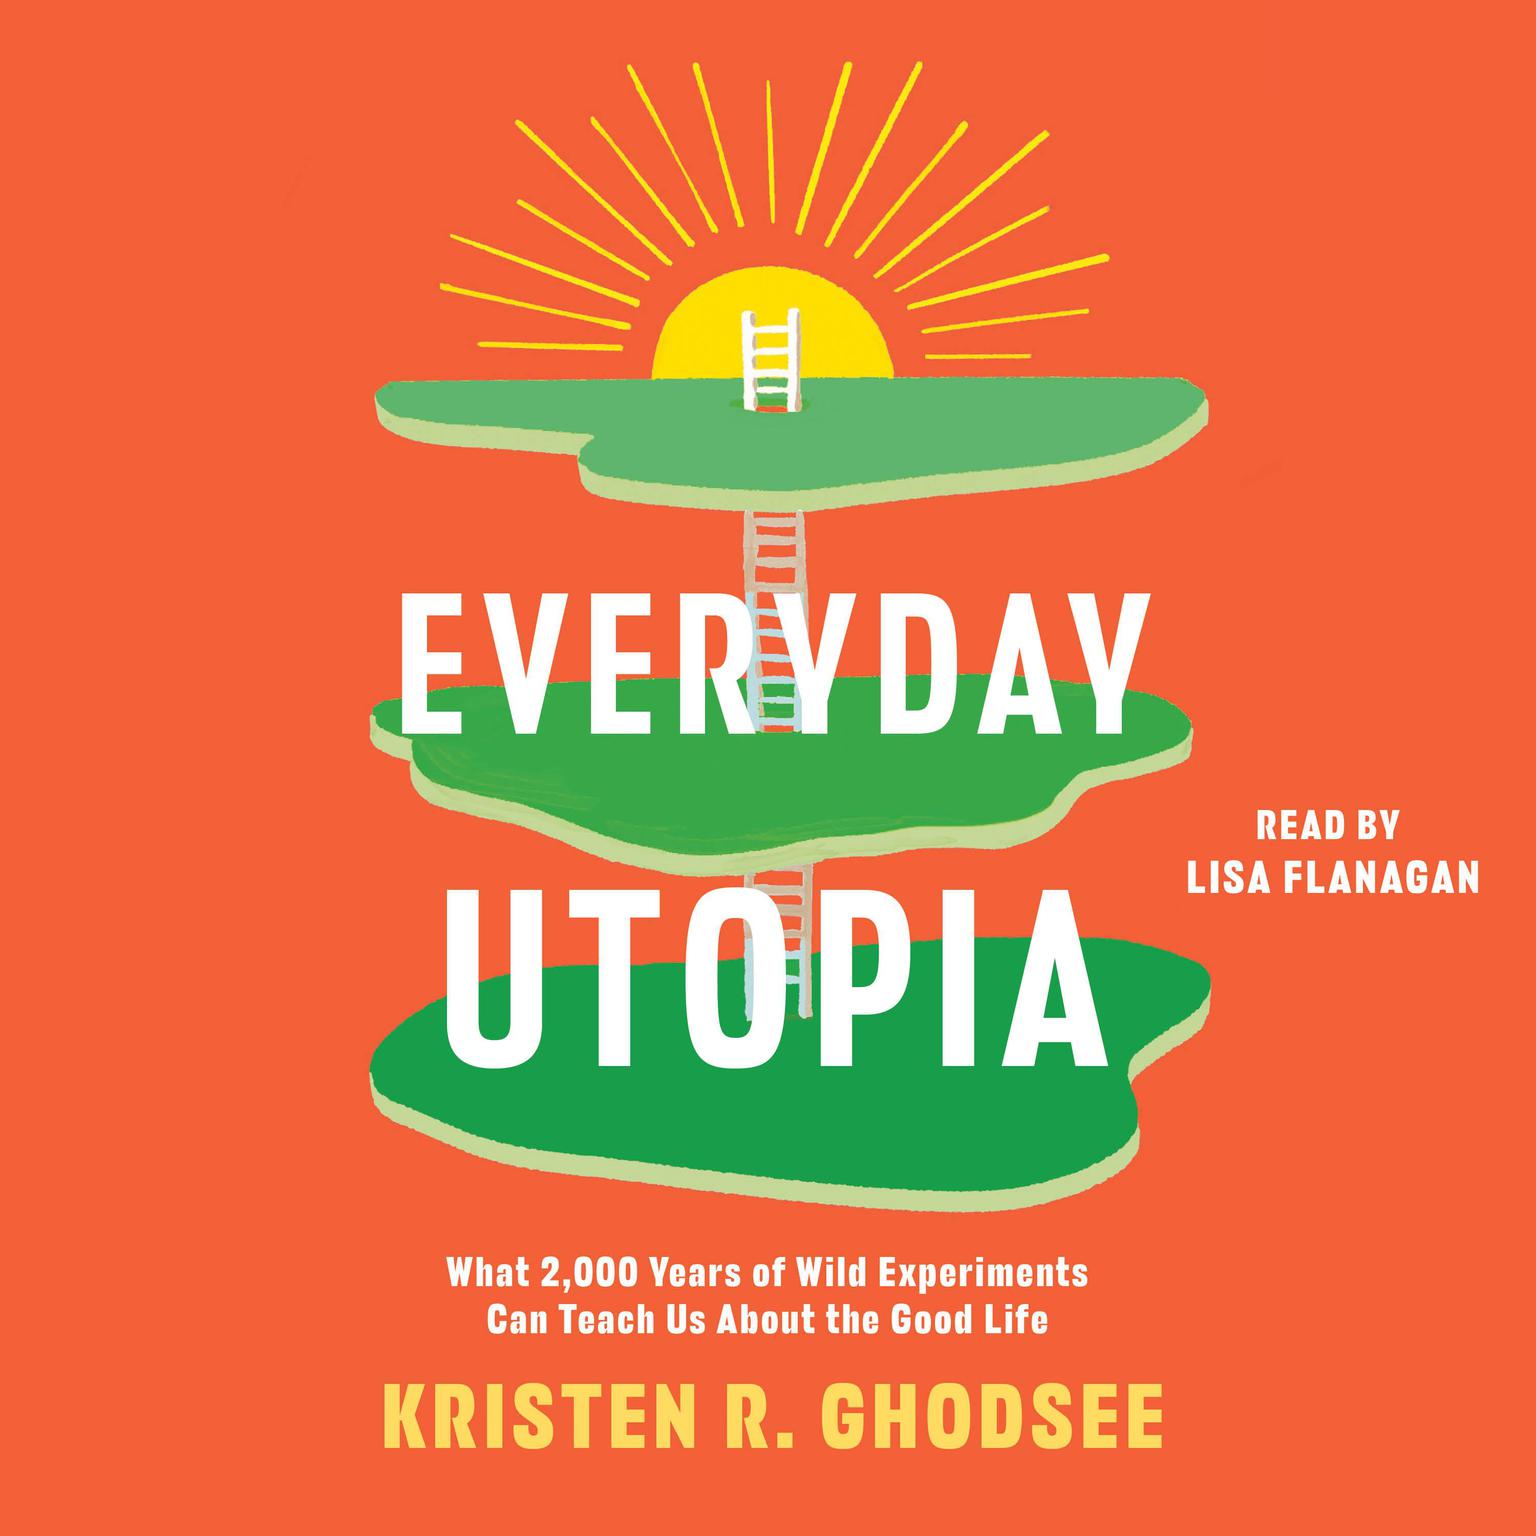 Everyday Utopia: What 2,000 Years of Wild Experiments Can Teach Us About the Good Life Audiobook, by Kristen R. Ghodsee